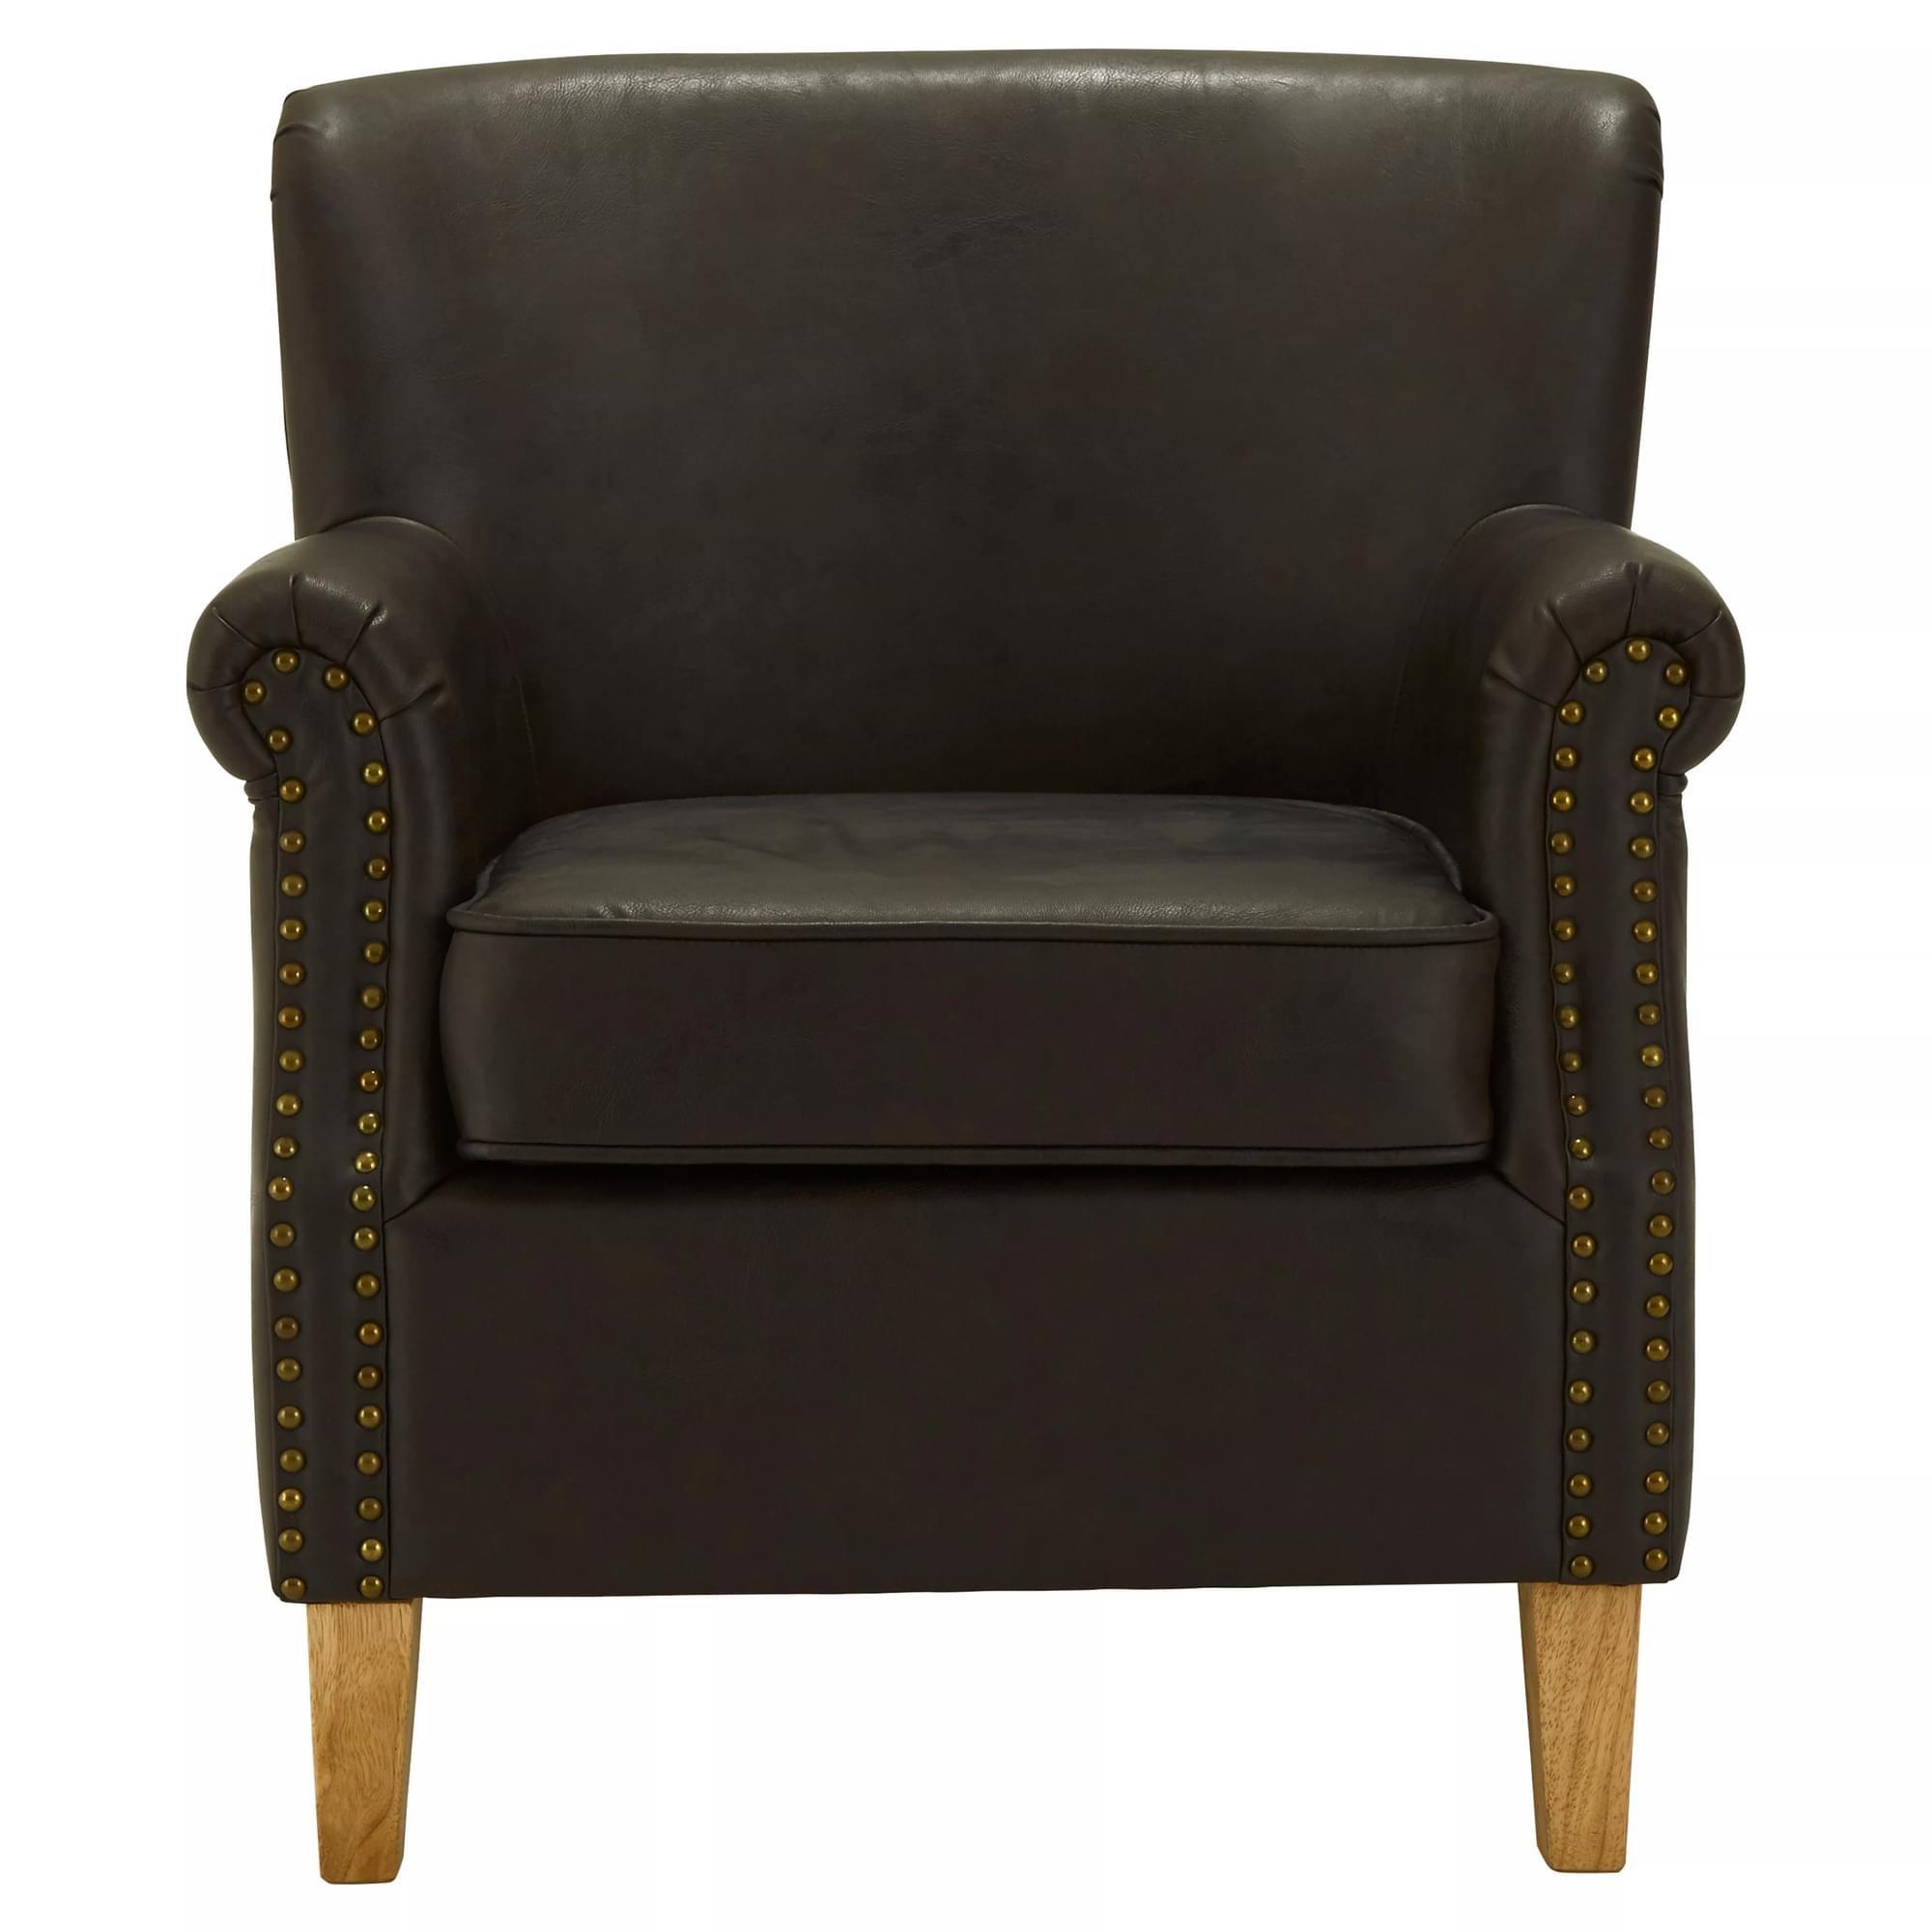 Interiors by Premier Trinity Brown Leather Effect Armchair